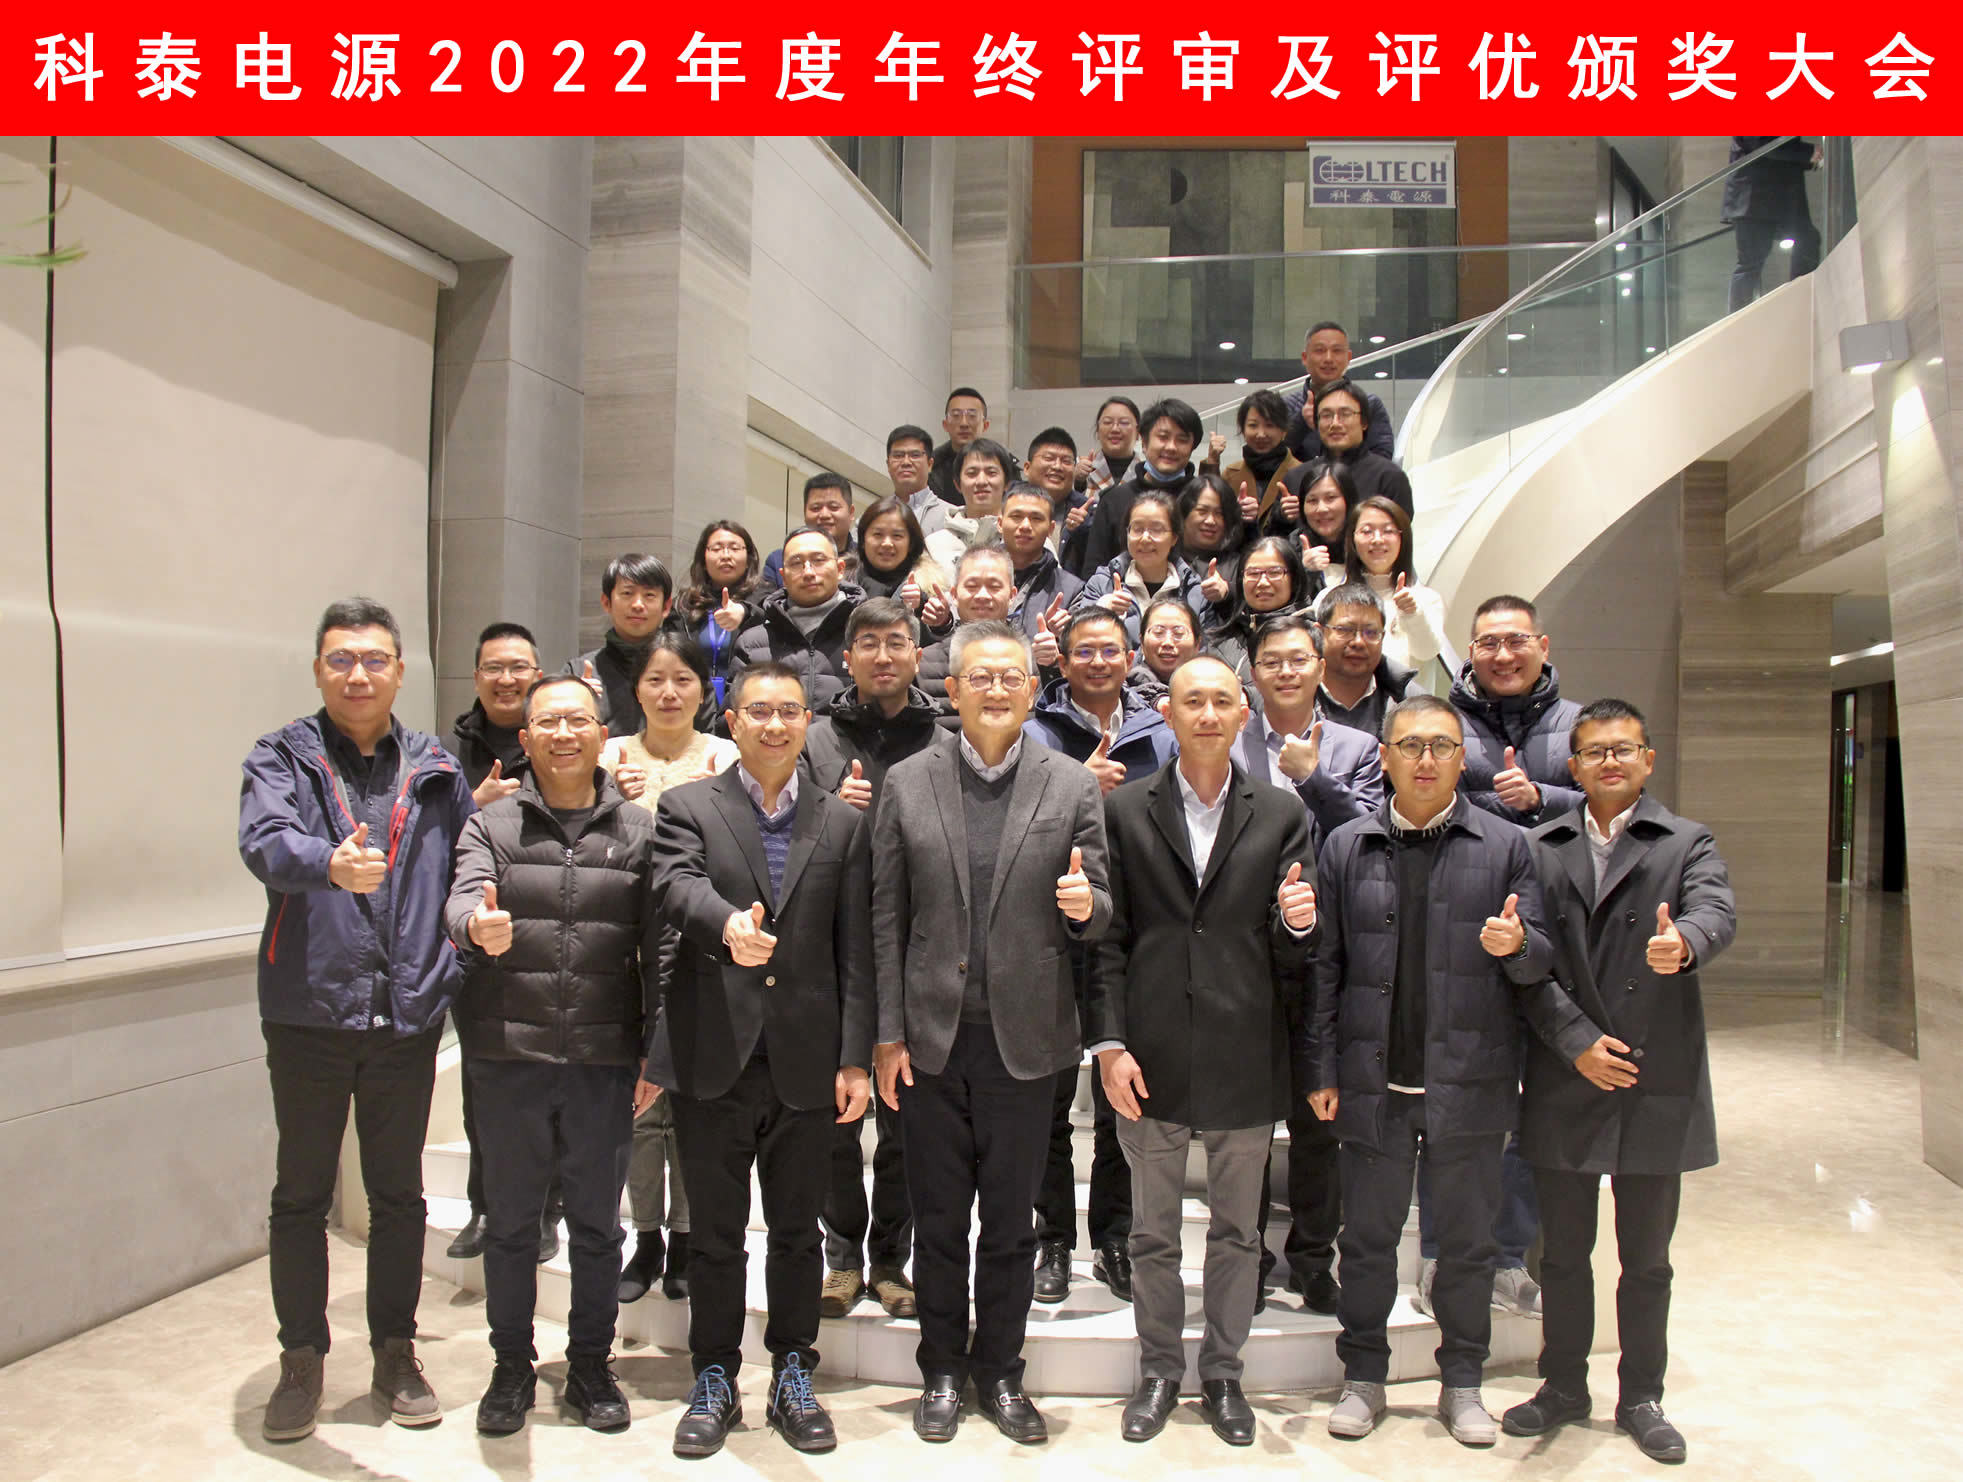 Face the difficulties, work hard, innovate and develop | Cooltech Power held the 2022 year-end review and award ceremony!